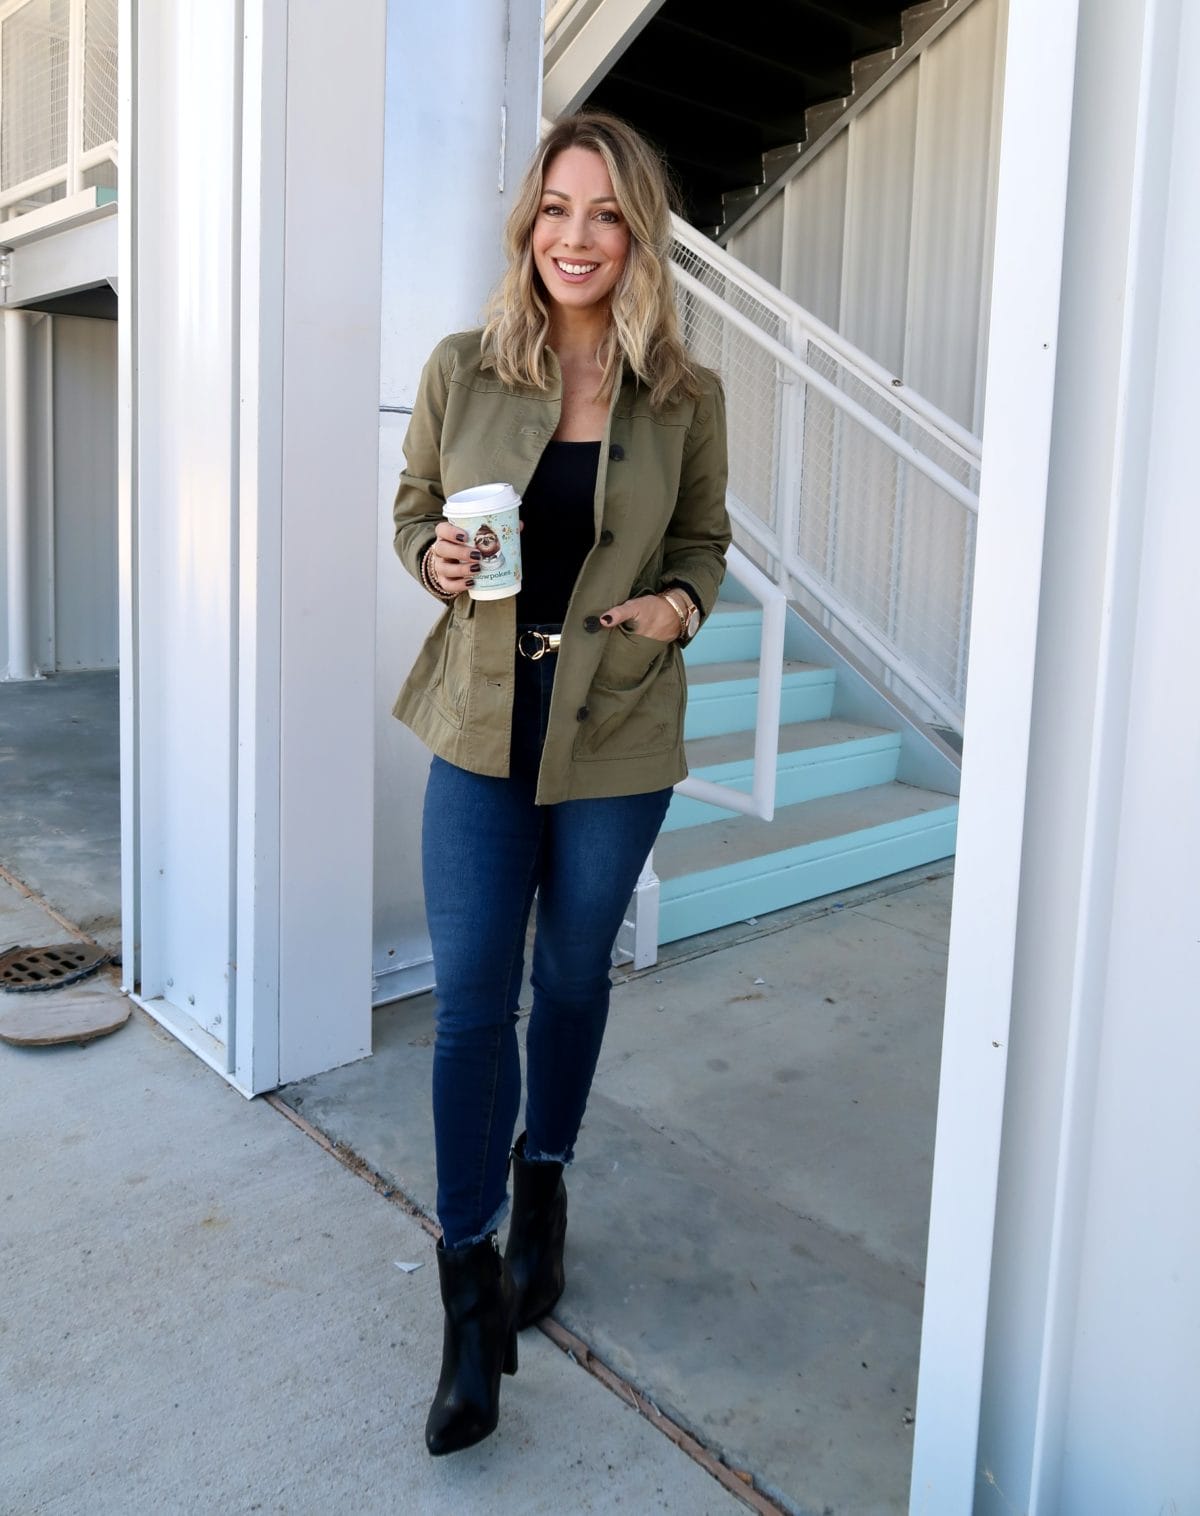 Walmart Fashion Finds, Bodysuit, Military Jacket, Jeans, Booties